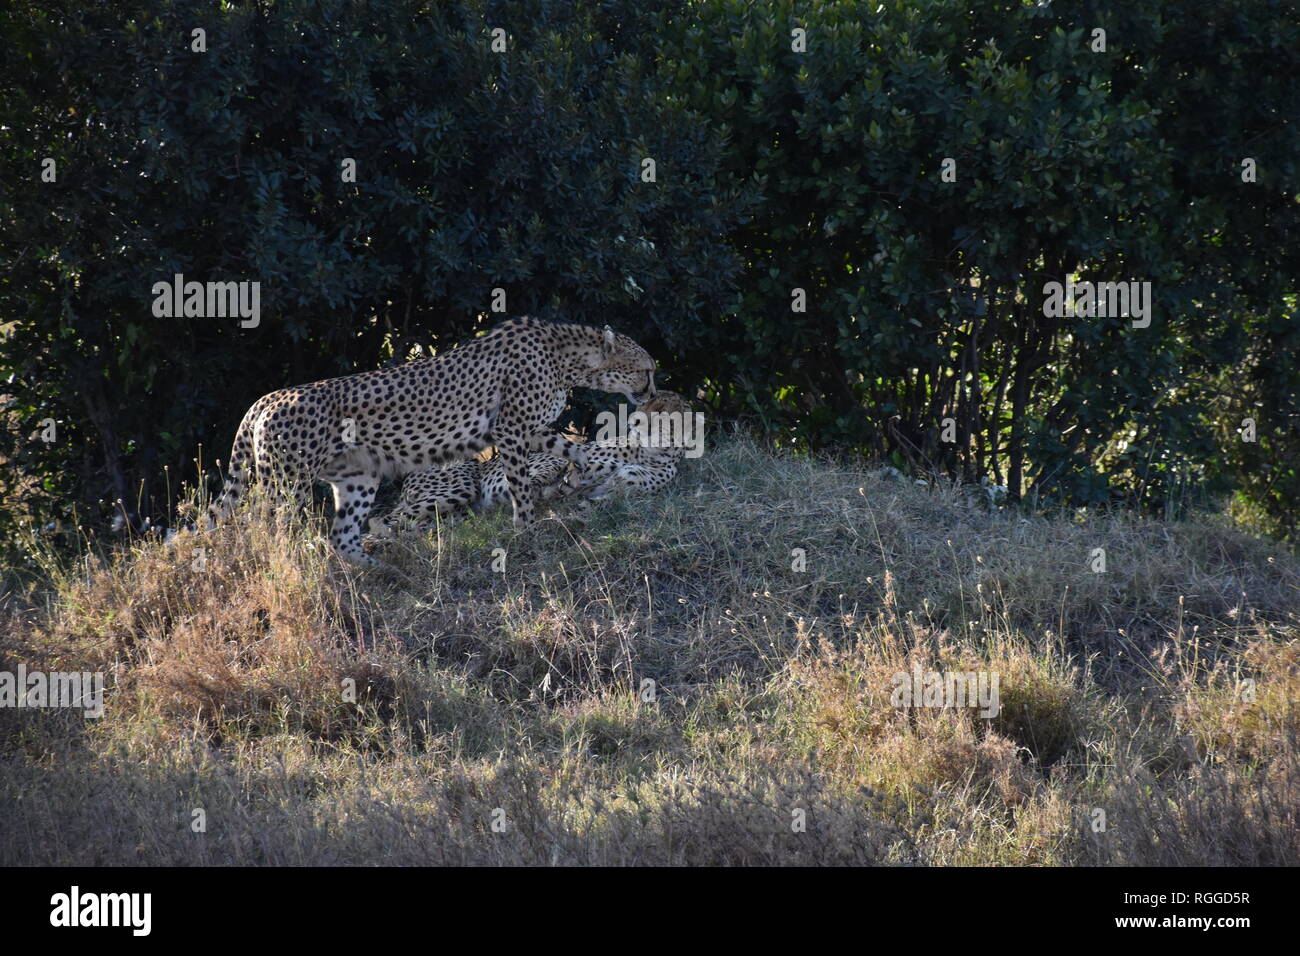 Two male cheetahs in the wild Stock Photo